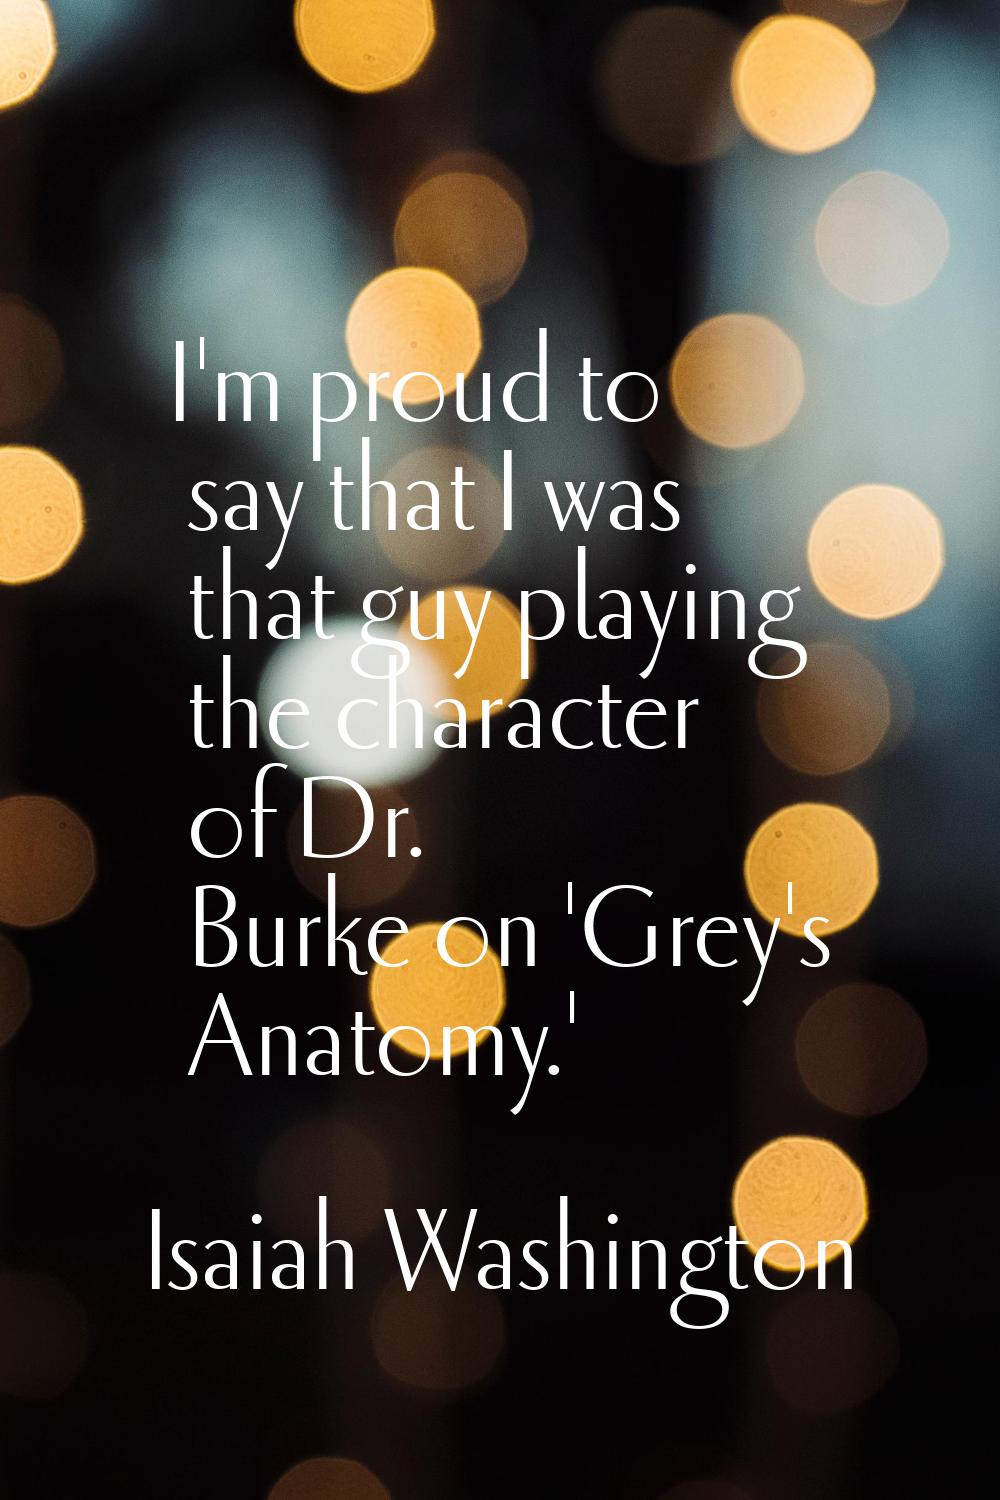 I'm proud to say that I was that guy playing the character of Dr. Burke on 'Grey's Anatomy.'